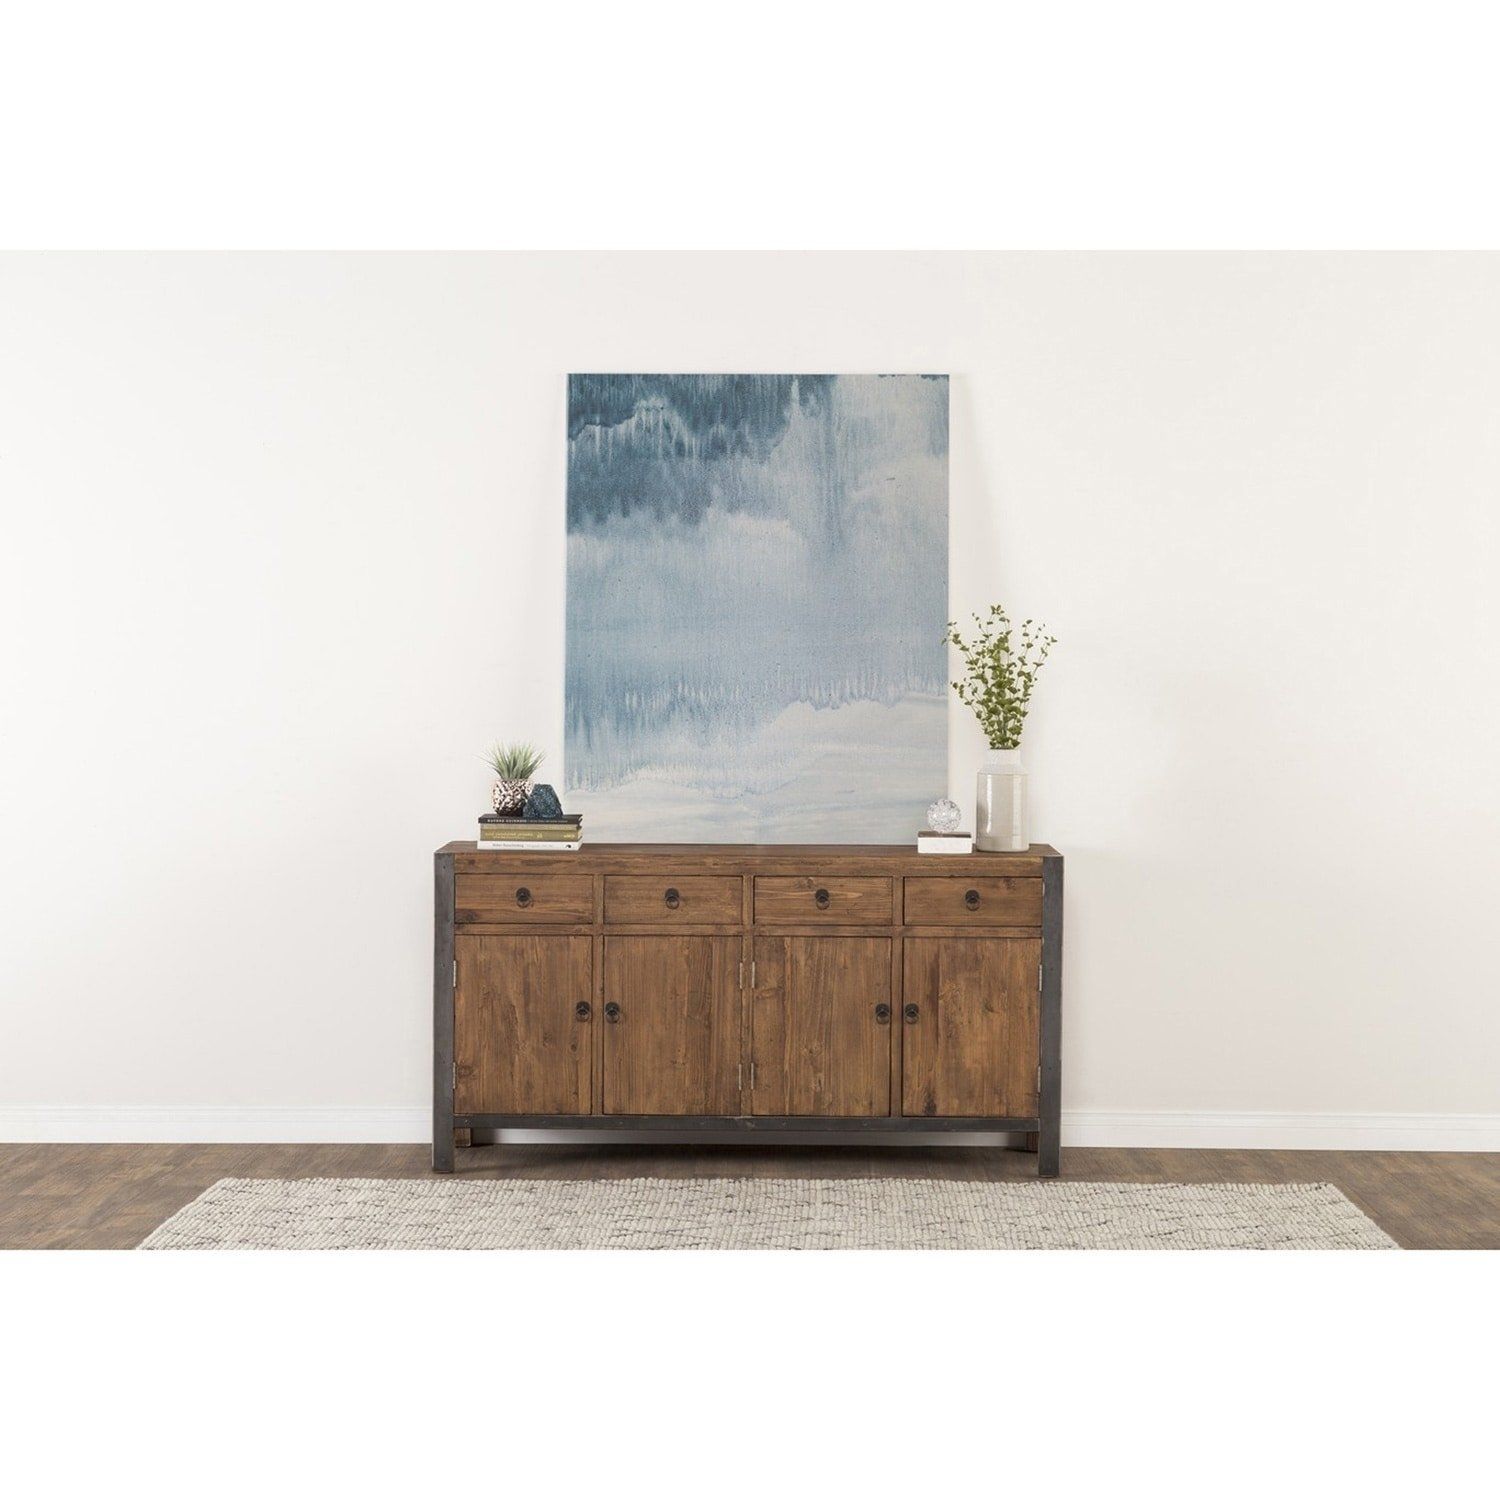 Shop Willow Reclaimed Wood And Iron 70 Inch Buffetkosas Home With Regard To 2017 Reclaimed Elm 71 Inch Sideboards (View 2 of 20)